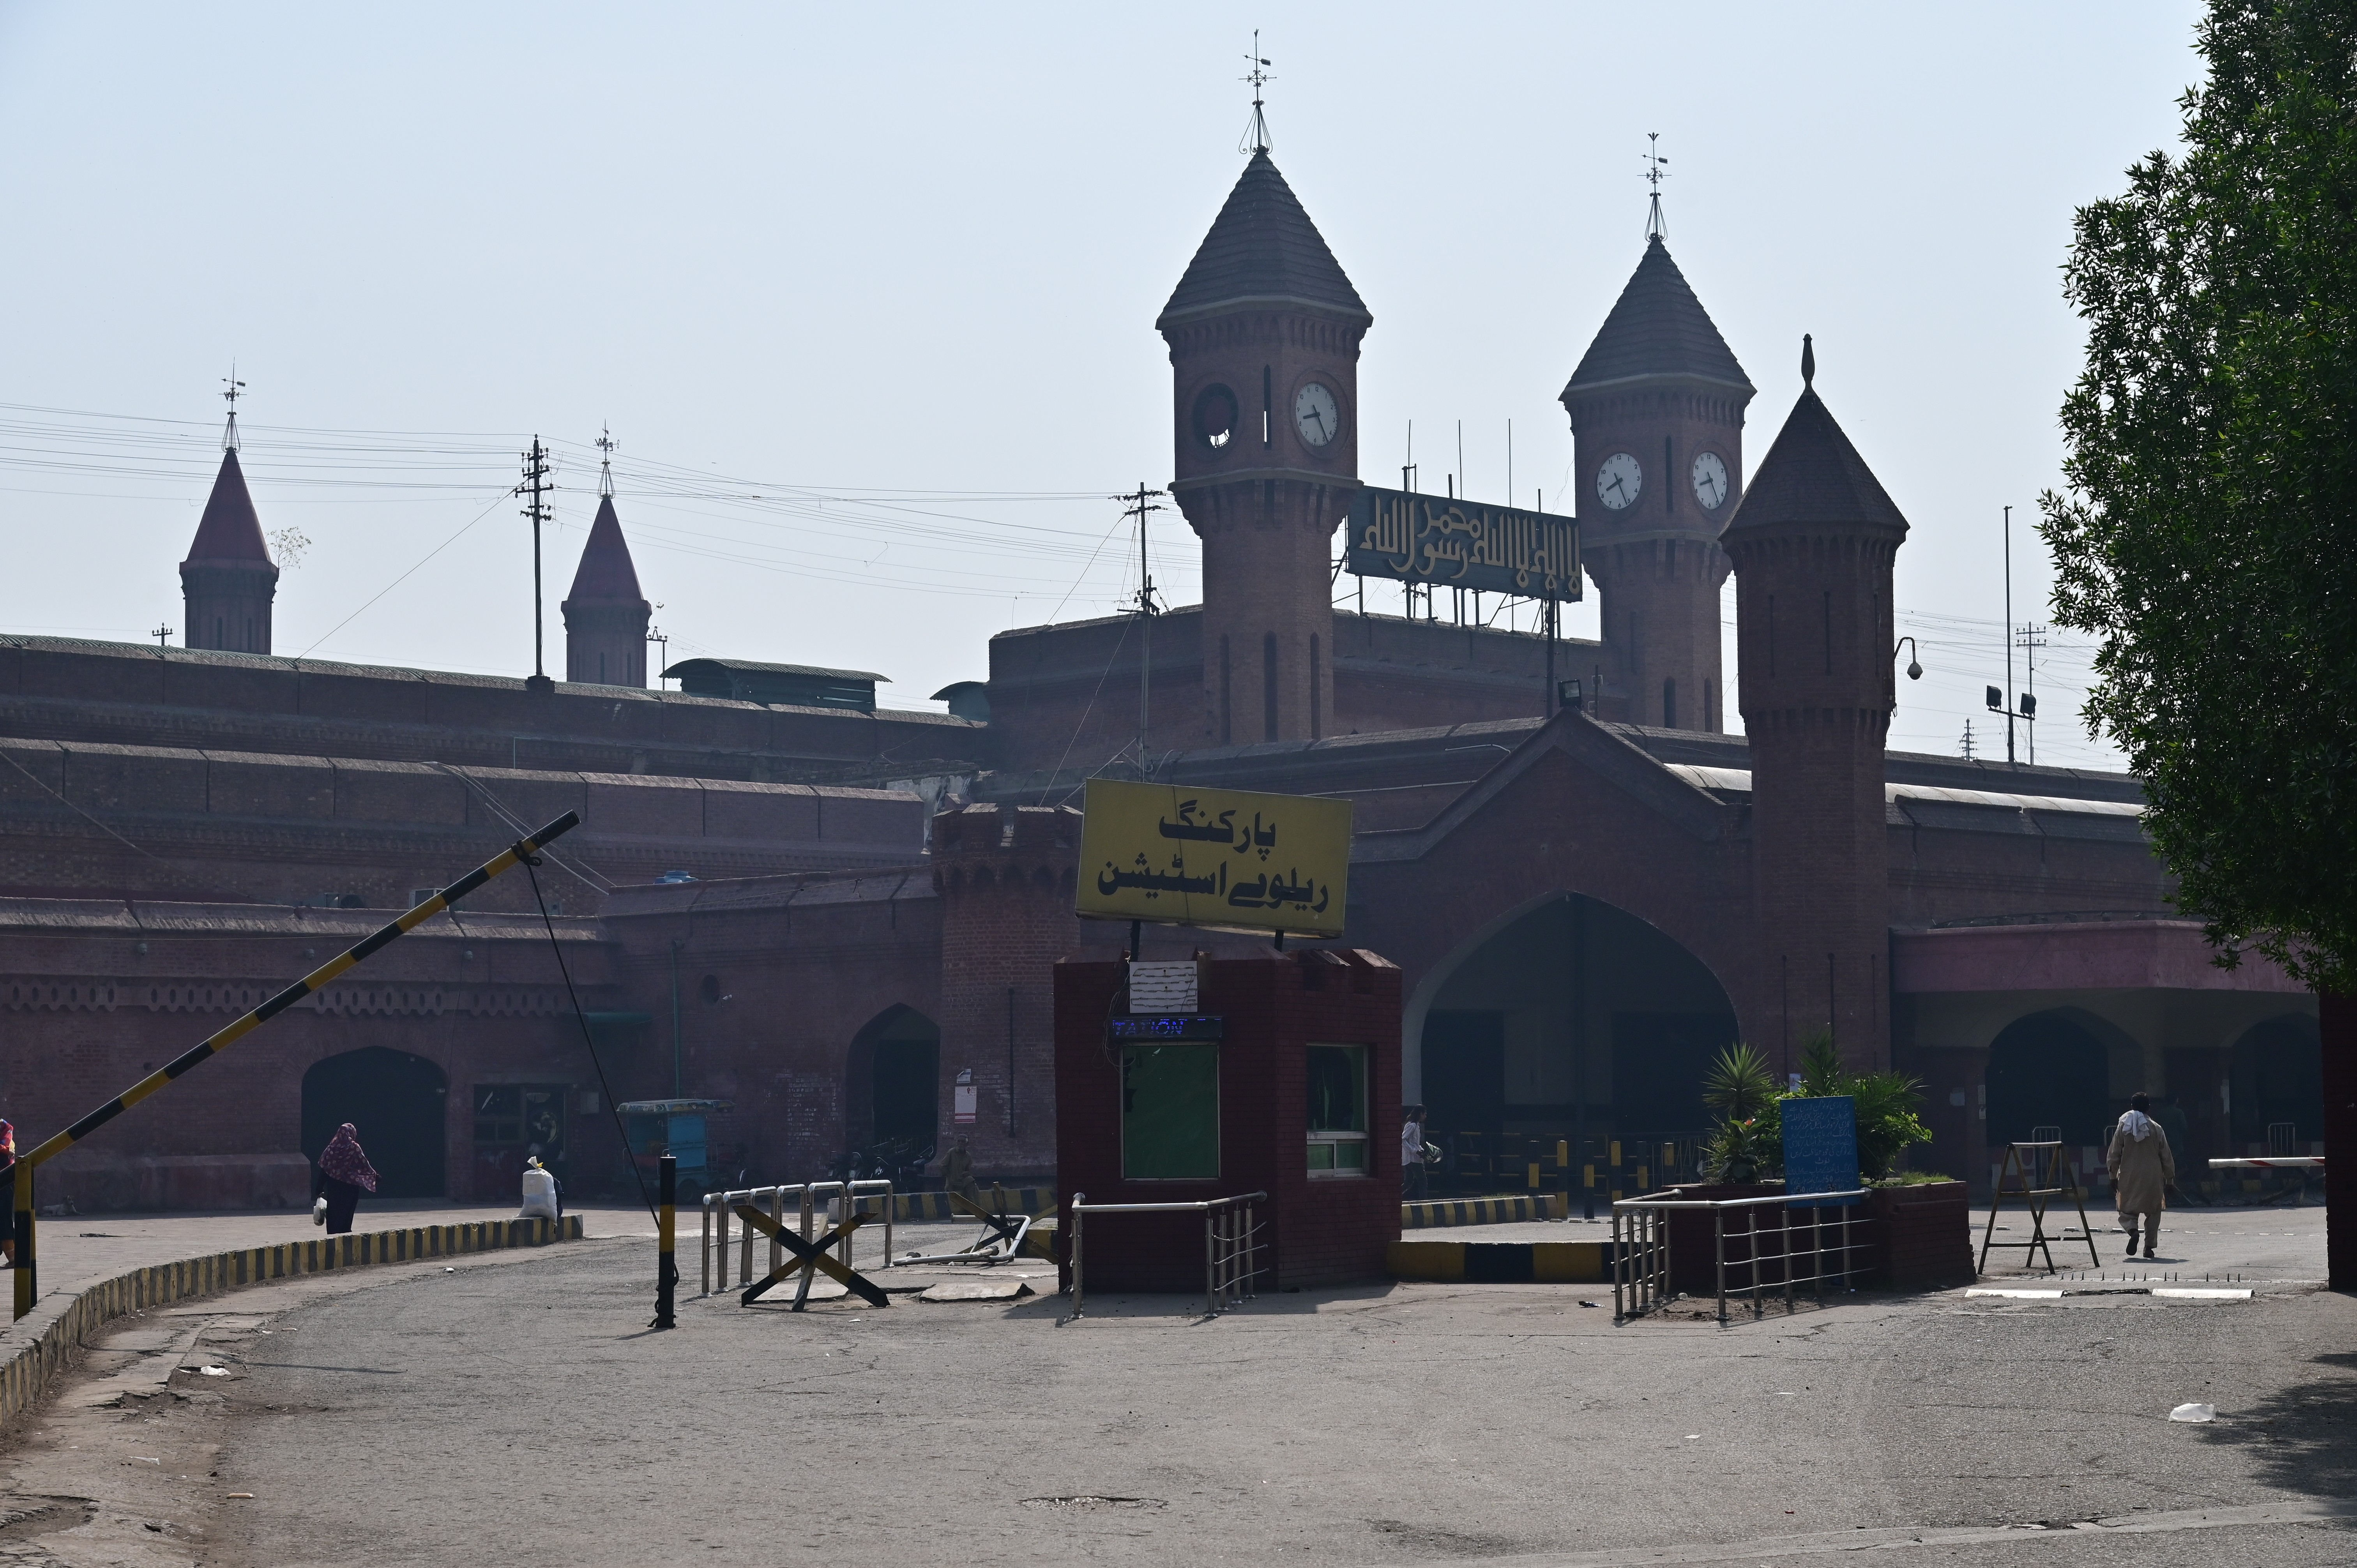 The Lahore Railway station